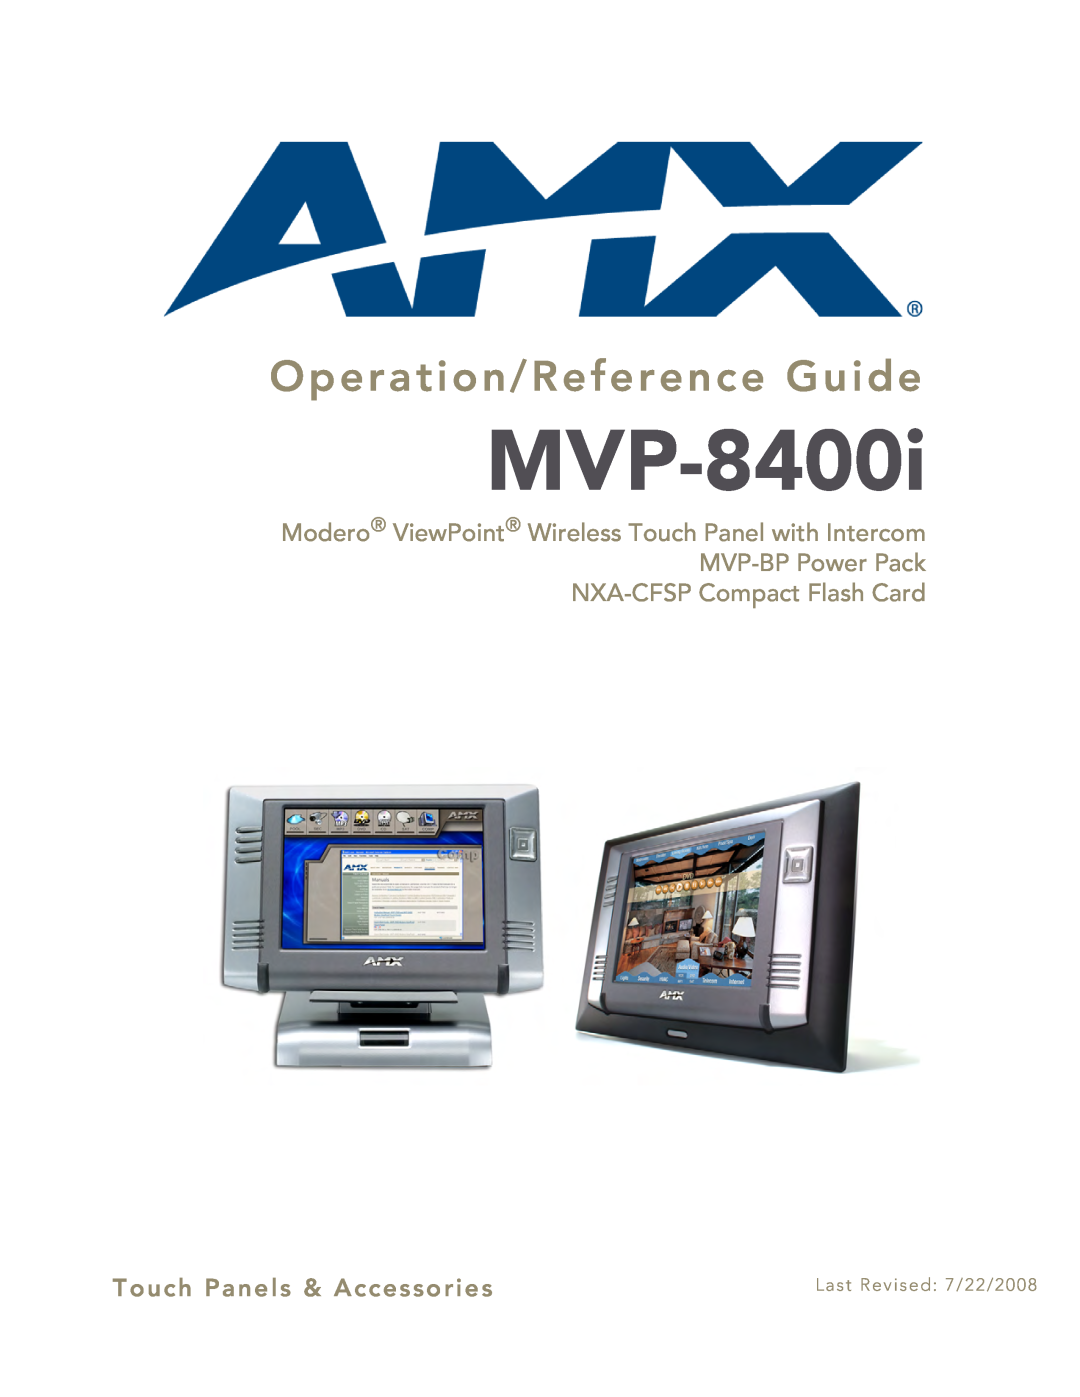 AMX MVP-8400i manual Operation/Reference Guide, Touch Panels & Accessories, Last Revised 7/22/2008 